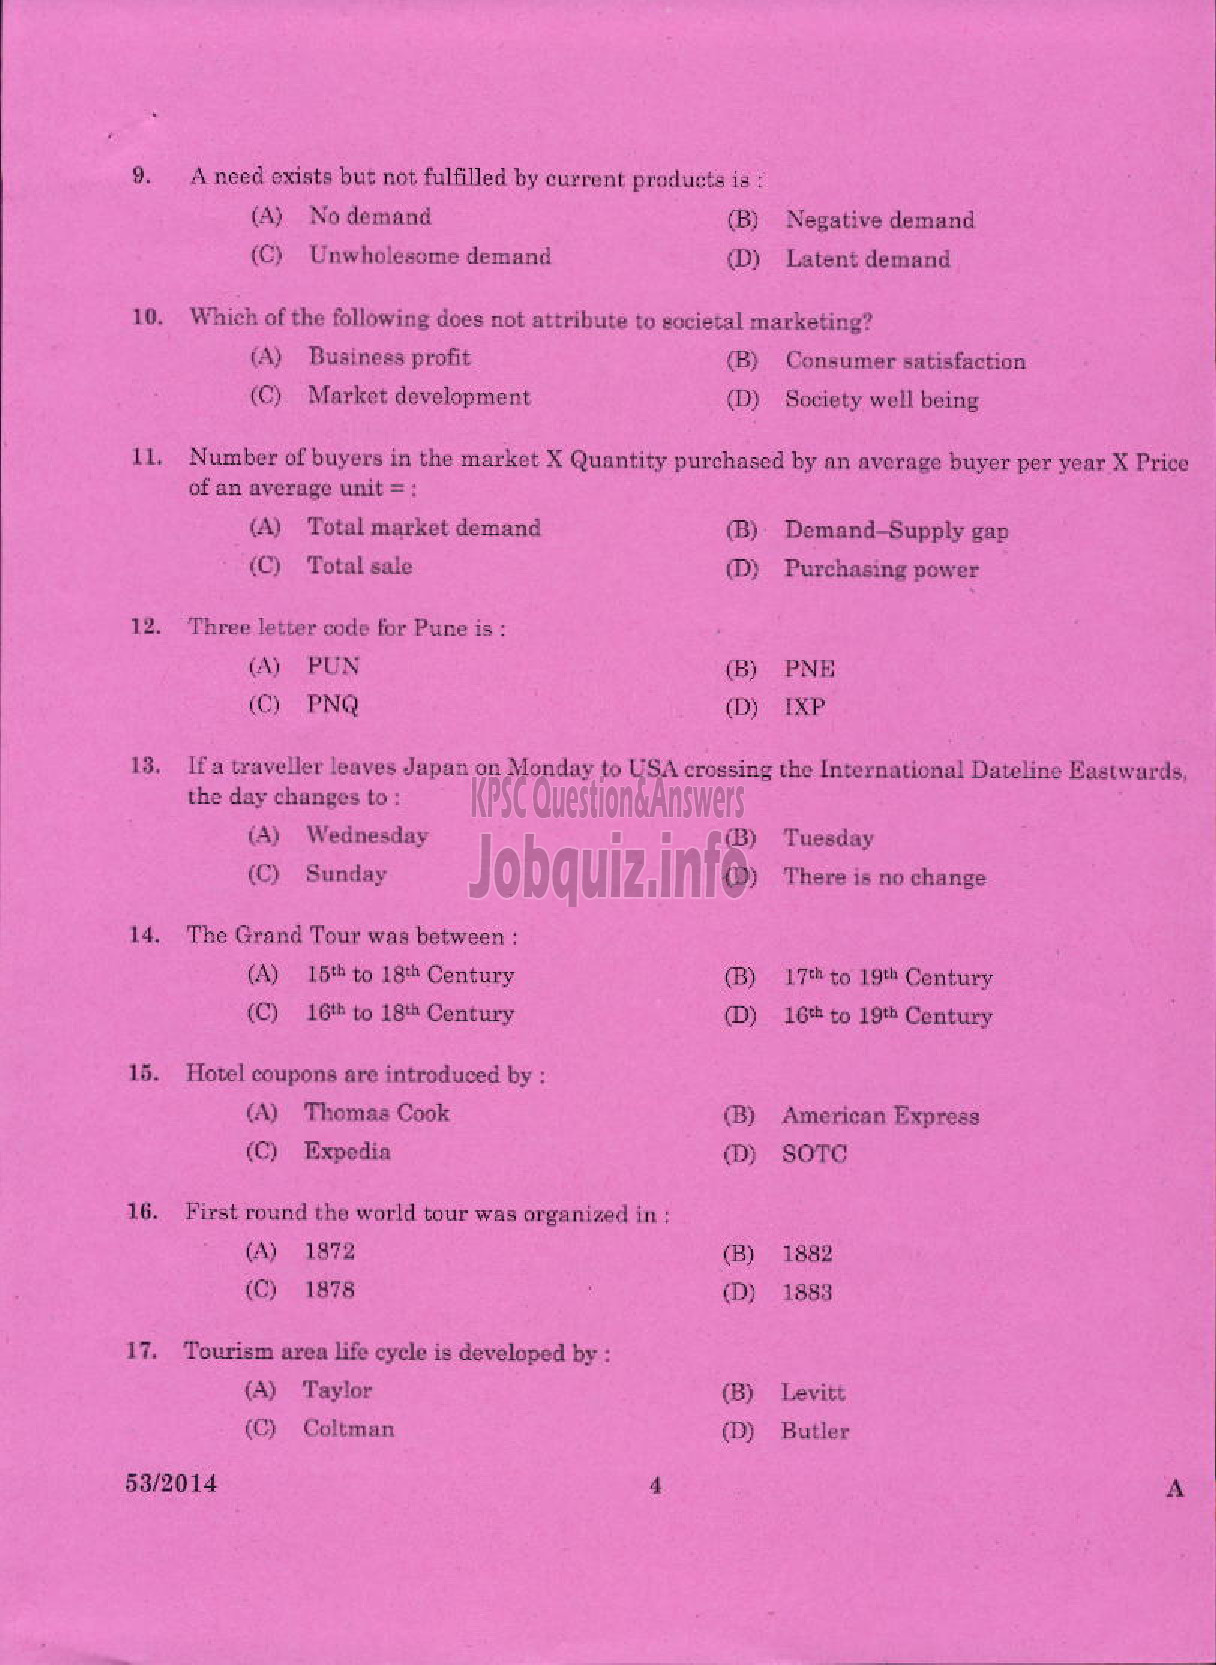 Kerala PSC Question Paper - LECTURER IN TRAVEL AND TOURISM KERALA COLLEGIATE EDUCATION-2